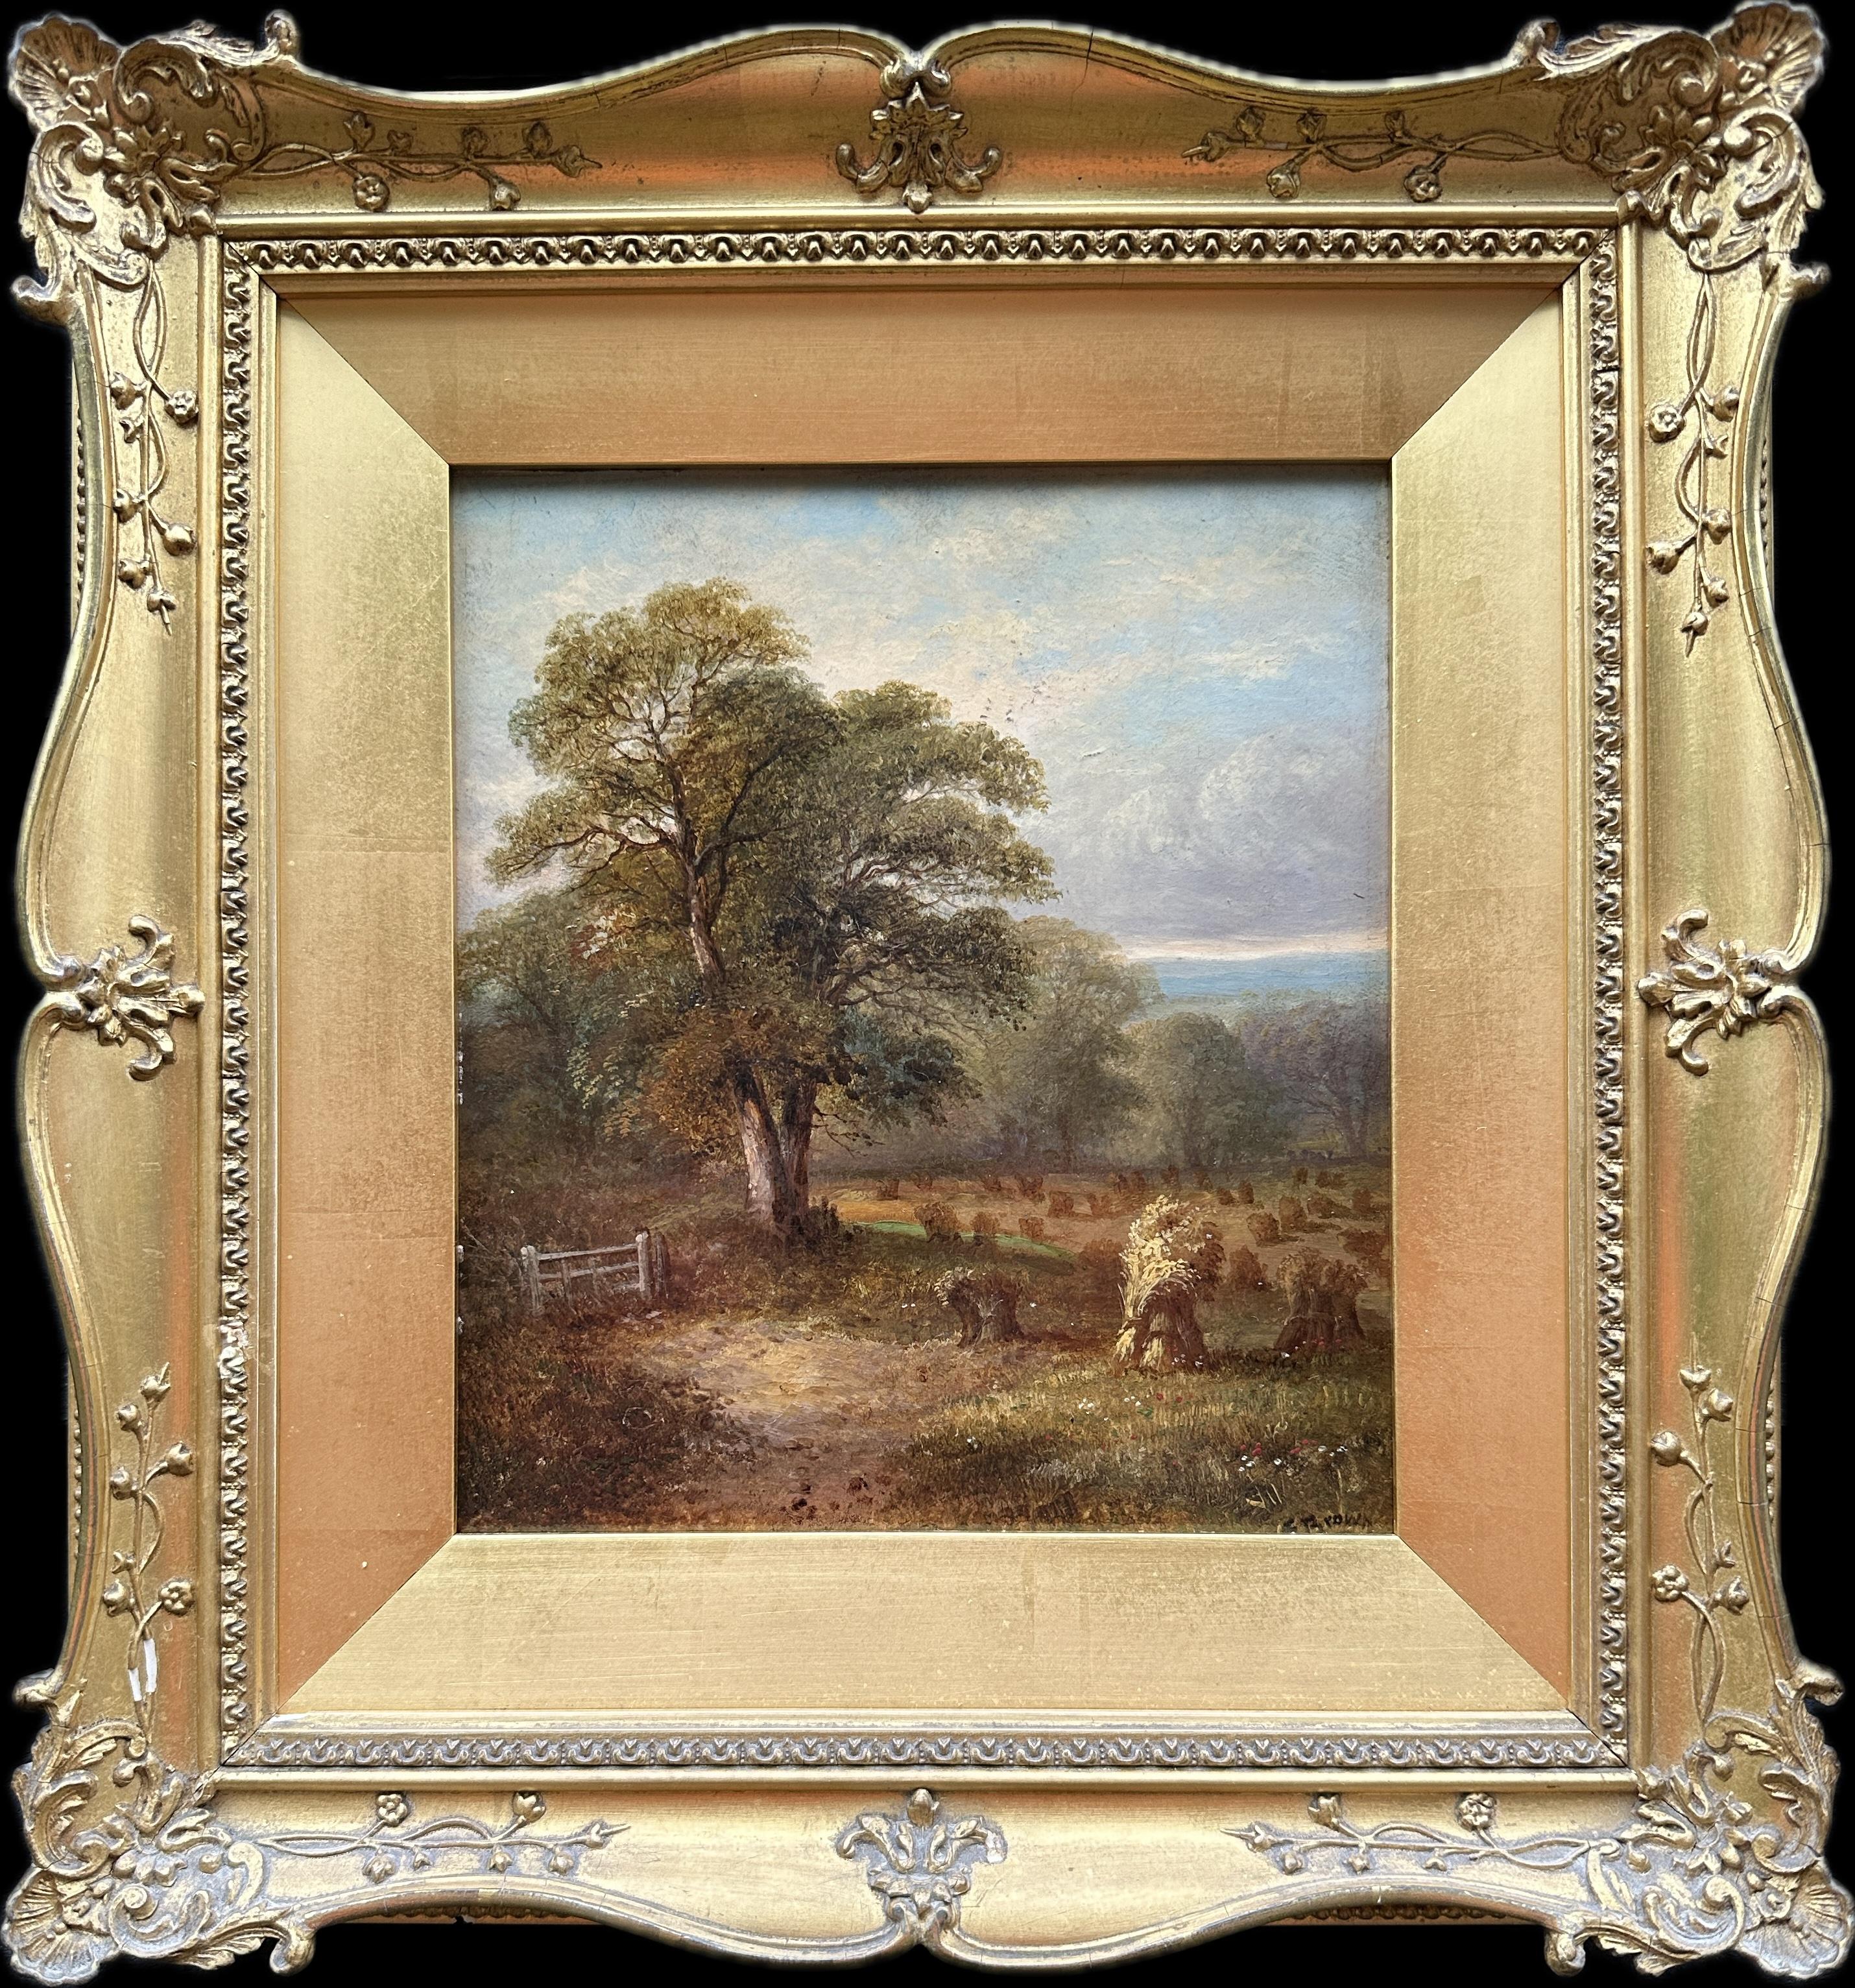 C. Brown Landscape Painting - 19th century English landscape with trees, a Harvest Field during Summertime